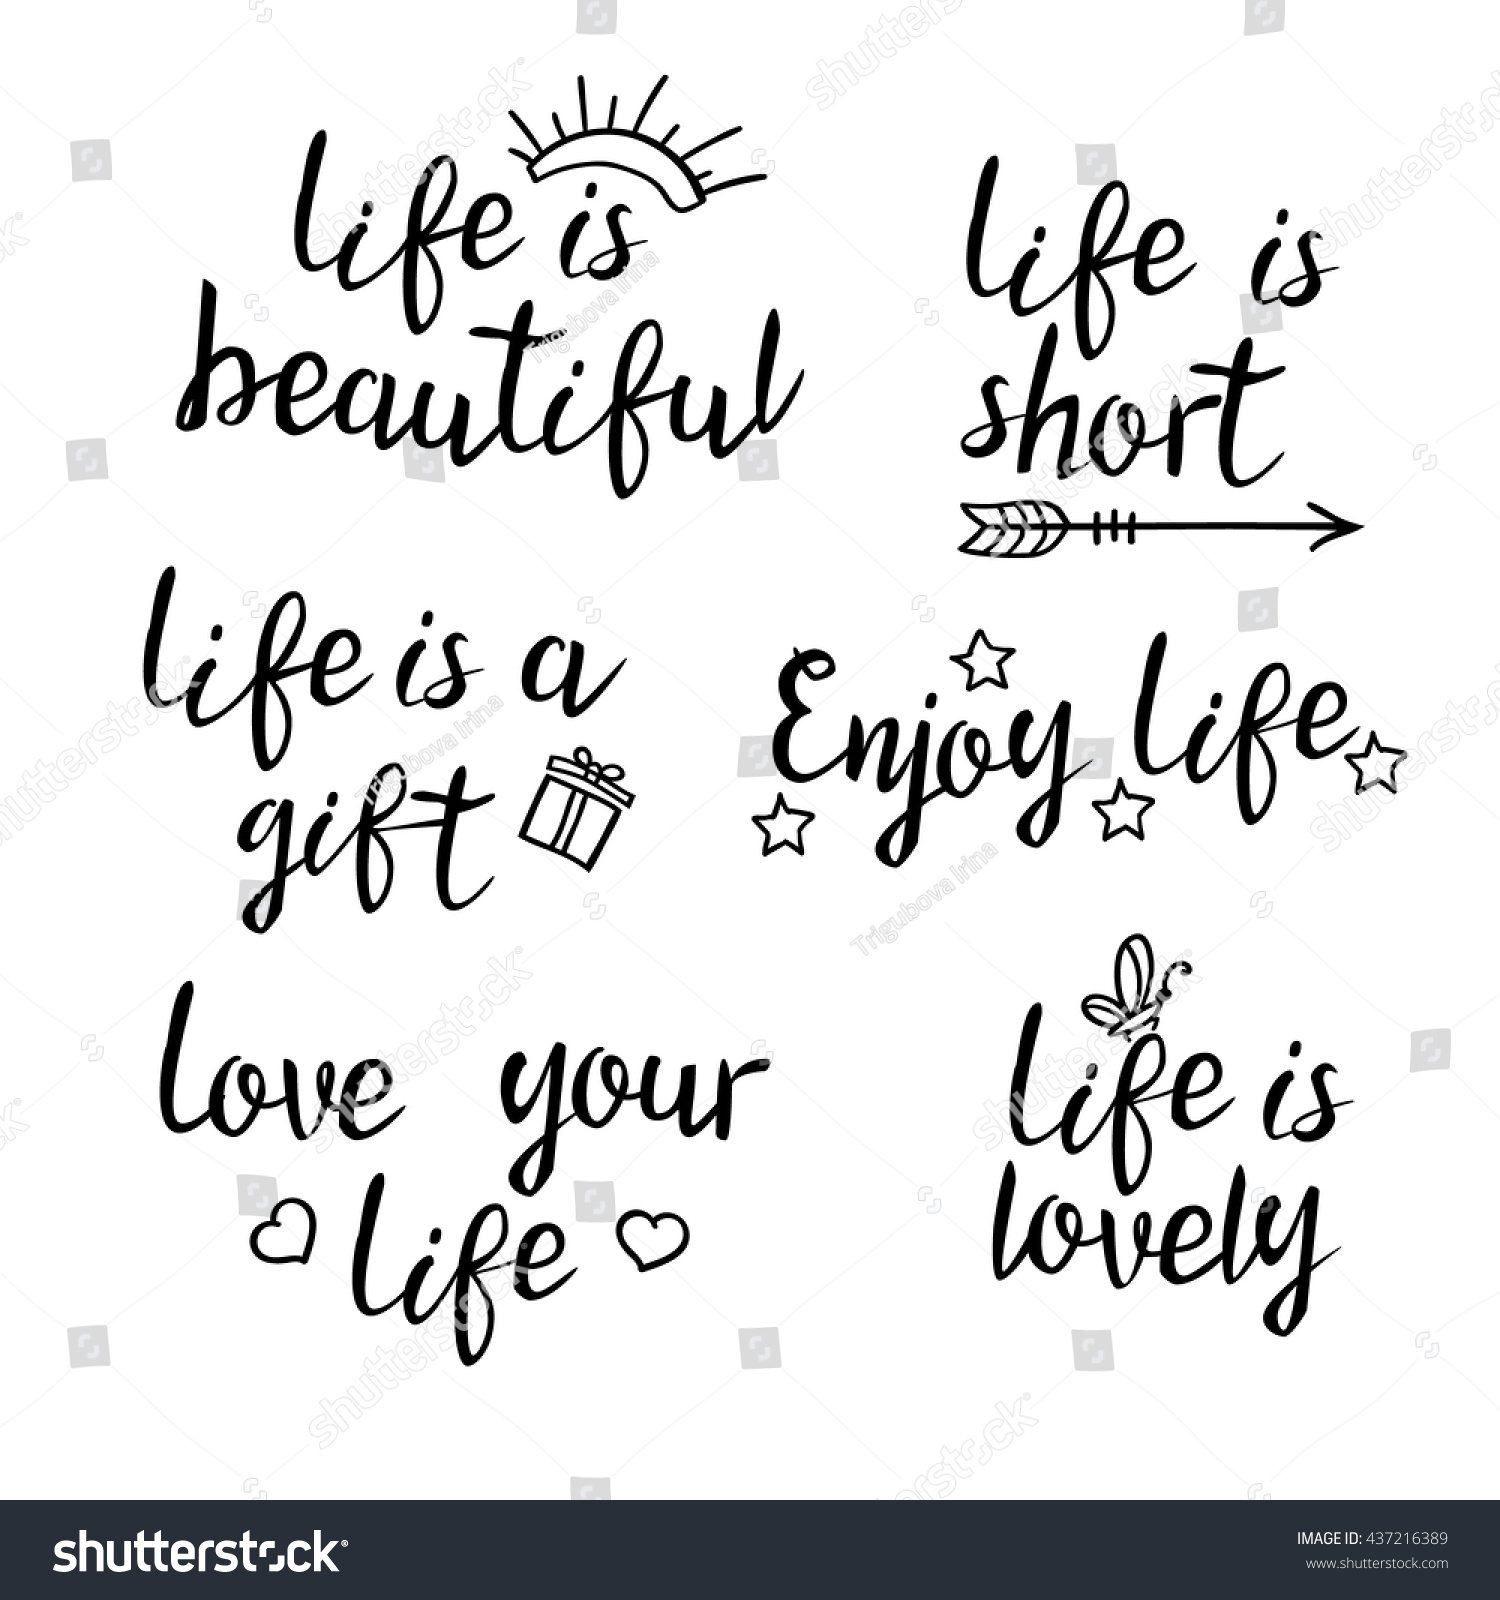 Calligraphy Inspirational quote about life For postcard poster graphic design Life is beautiful short lovely Enjoy and love your life Life is a t